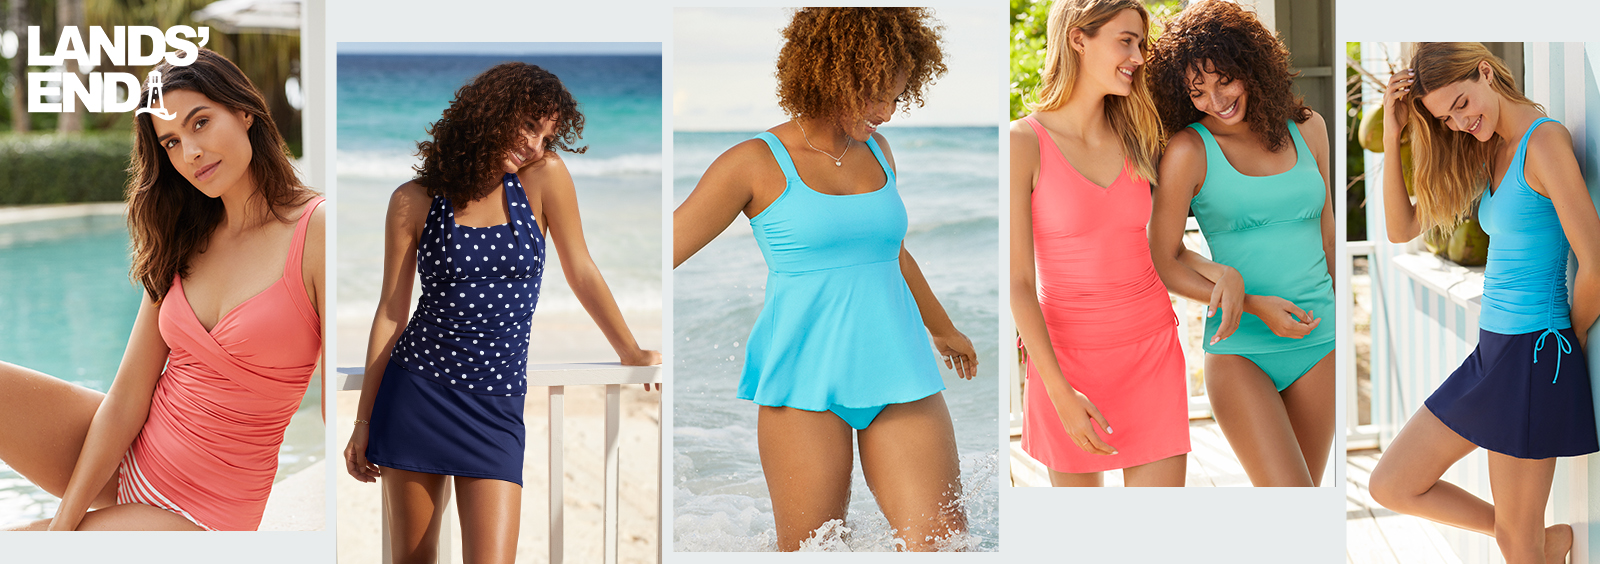 Top 5 Best Mastectomy Swimsuits